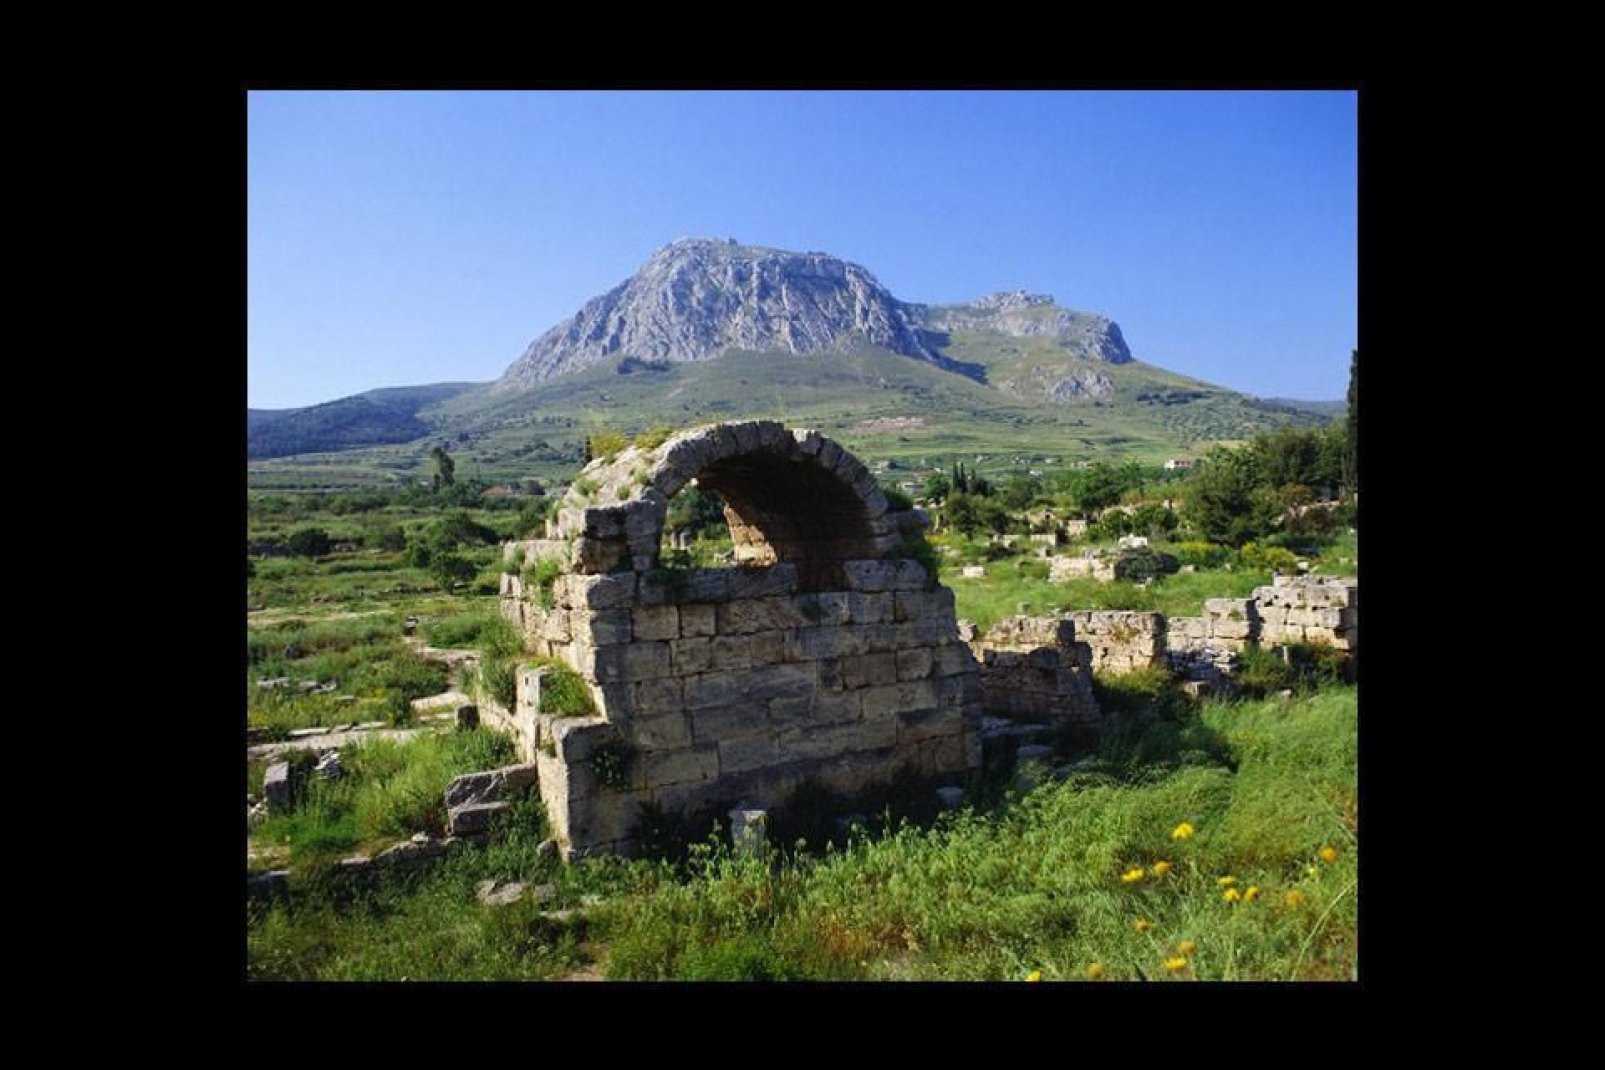 Corinth was once home to the famous temple of Aphrodite.